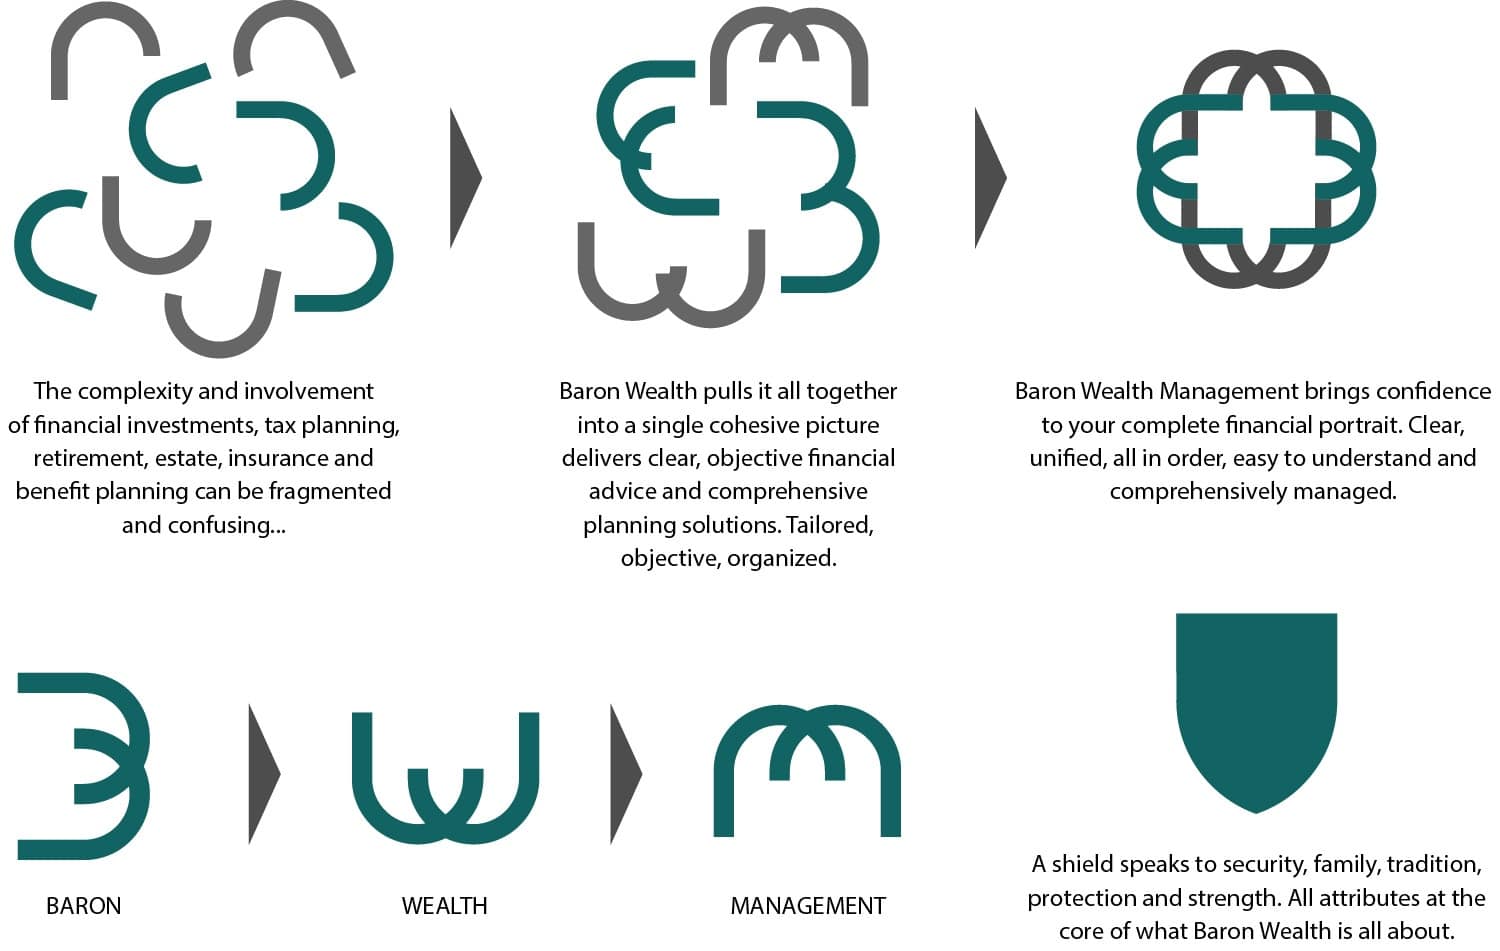 Baron Wealth Management Logo Symbol Story - Meaning behind the logo